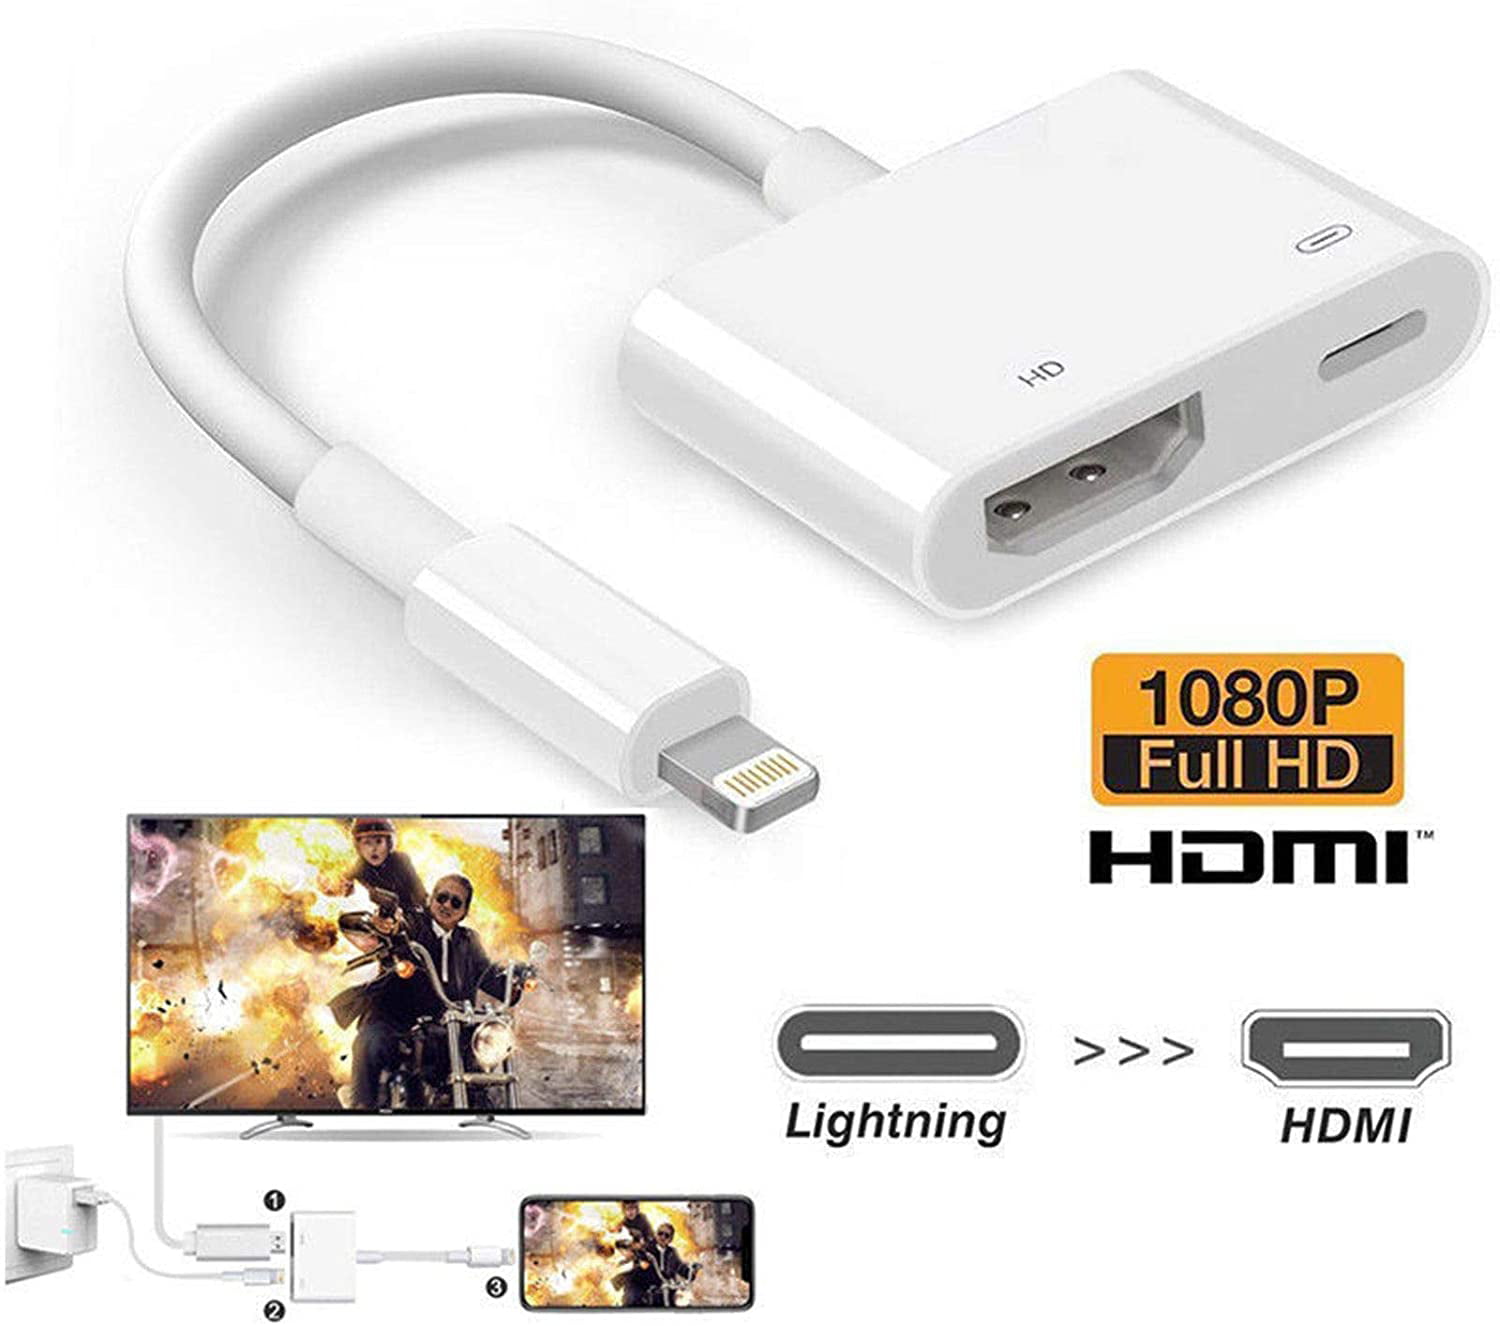 Apple MFi Certified Lightning to HDMI Adapter,1080P Lightning Digital Audio AV Adapter with Charging Port Compatible with iPhone 12/11/XS/XR/X/8 iPad on HDTV/Monitor/Projector 